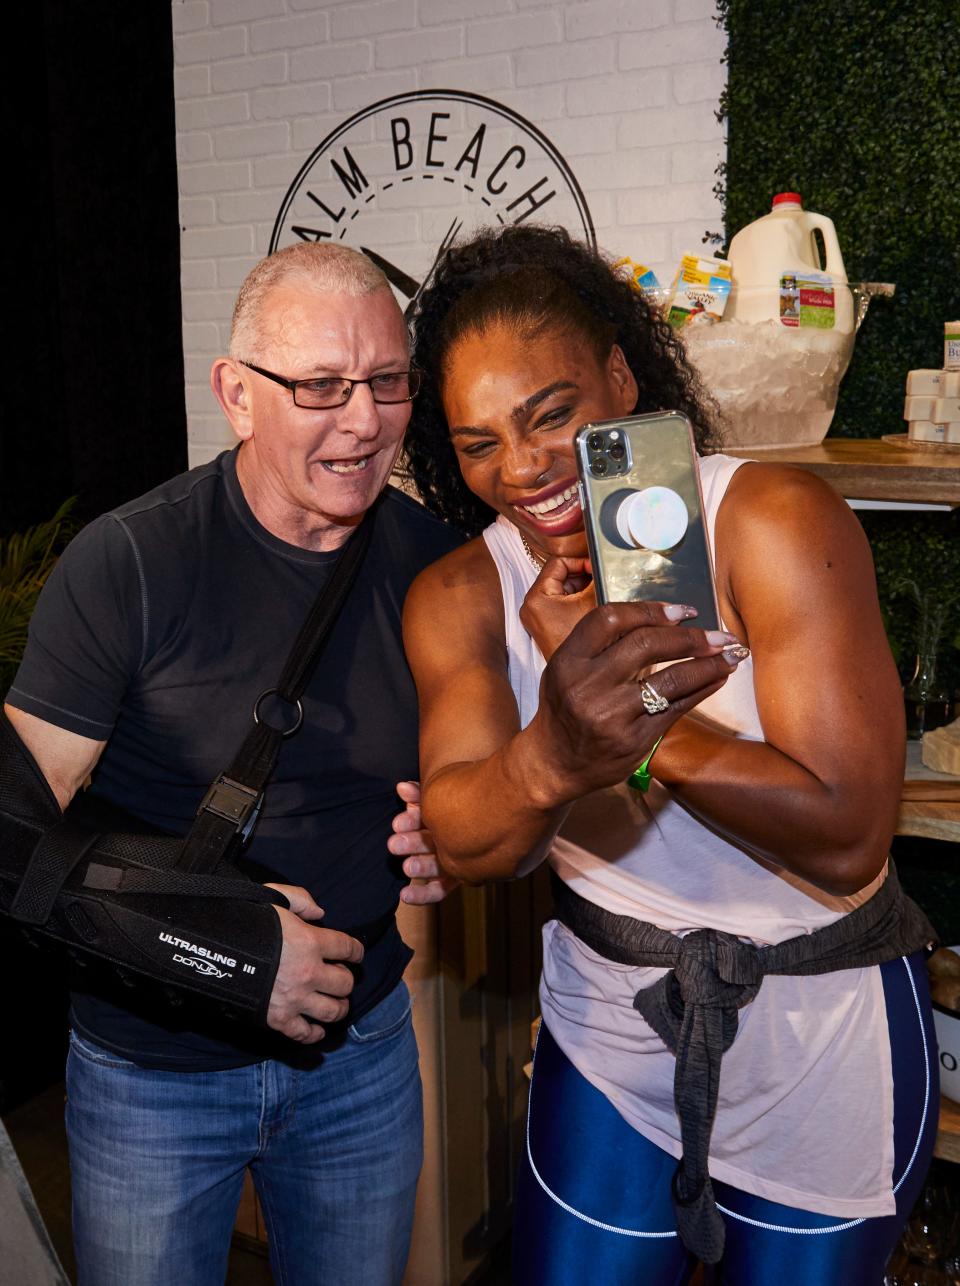 Food Network star chef Robert Irvine shares a snapshot with tennis superstar Serena Williams at the 2019 Palm Beach Food and Wine Festival's Grand Tasting finale.